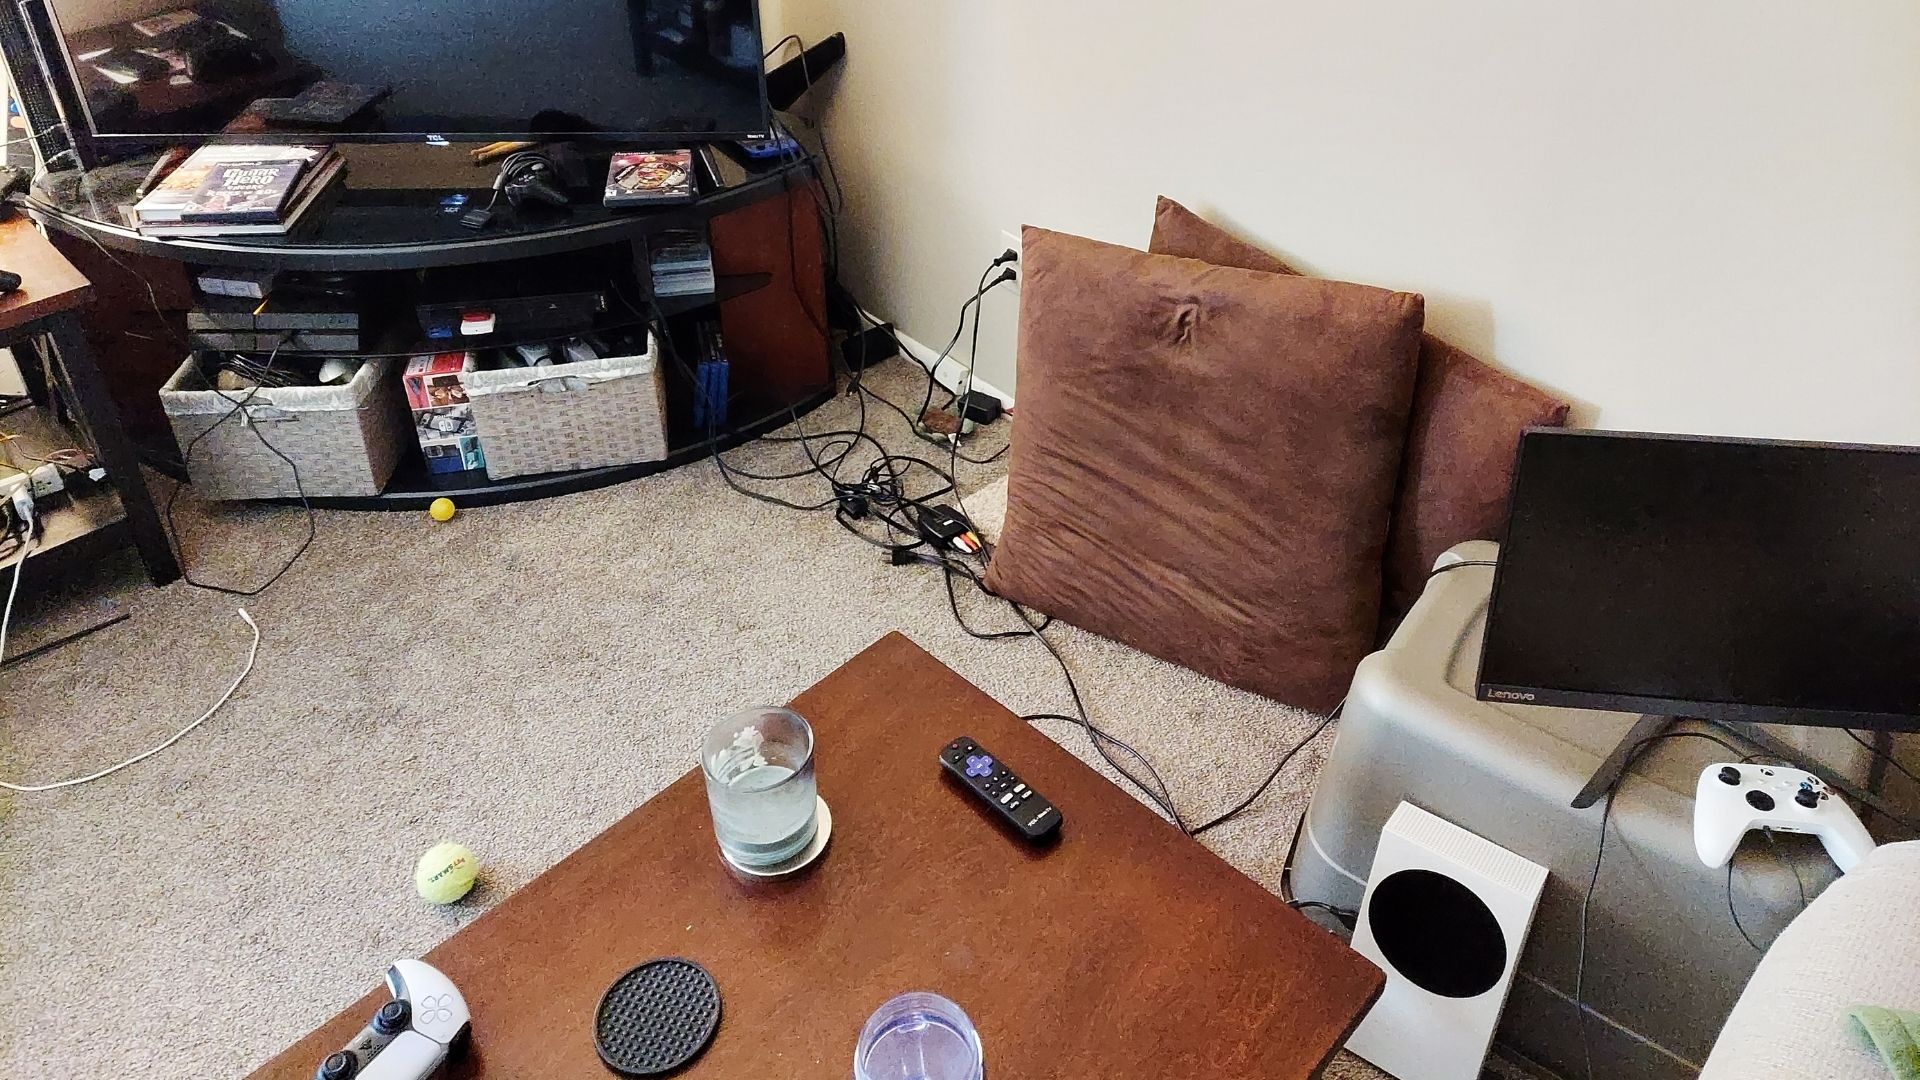 My living room setup so my partner and I can game together. (Photo: Ash Parrish)